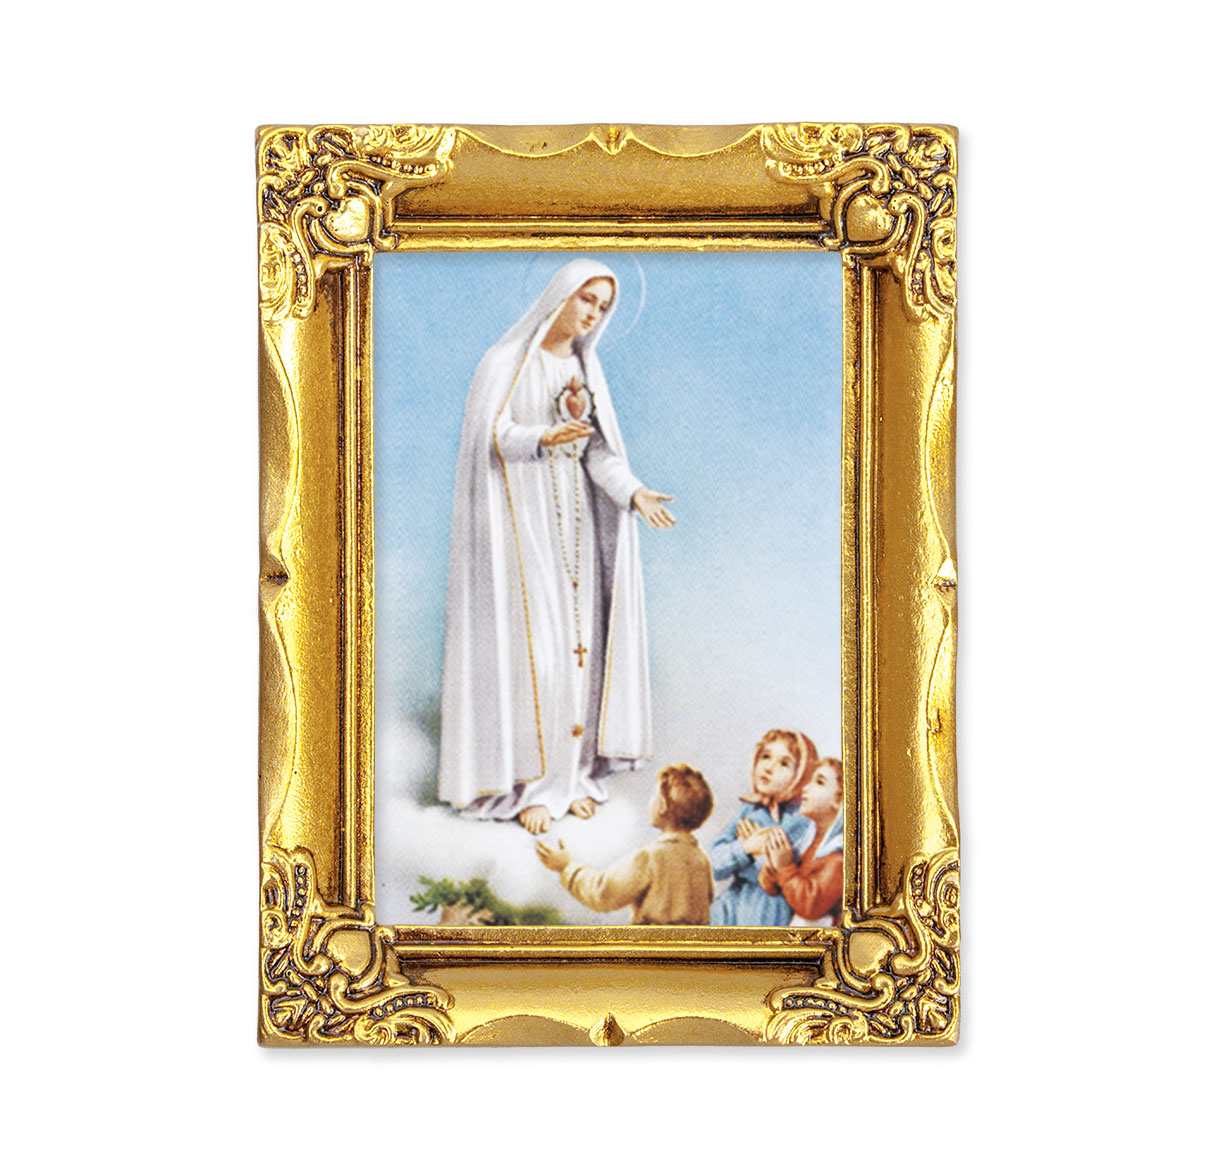 Our Lady of Fatima Antique Gold Framed Art